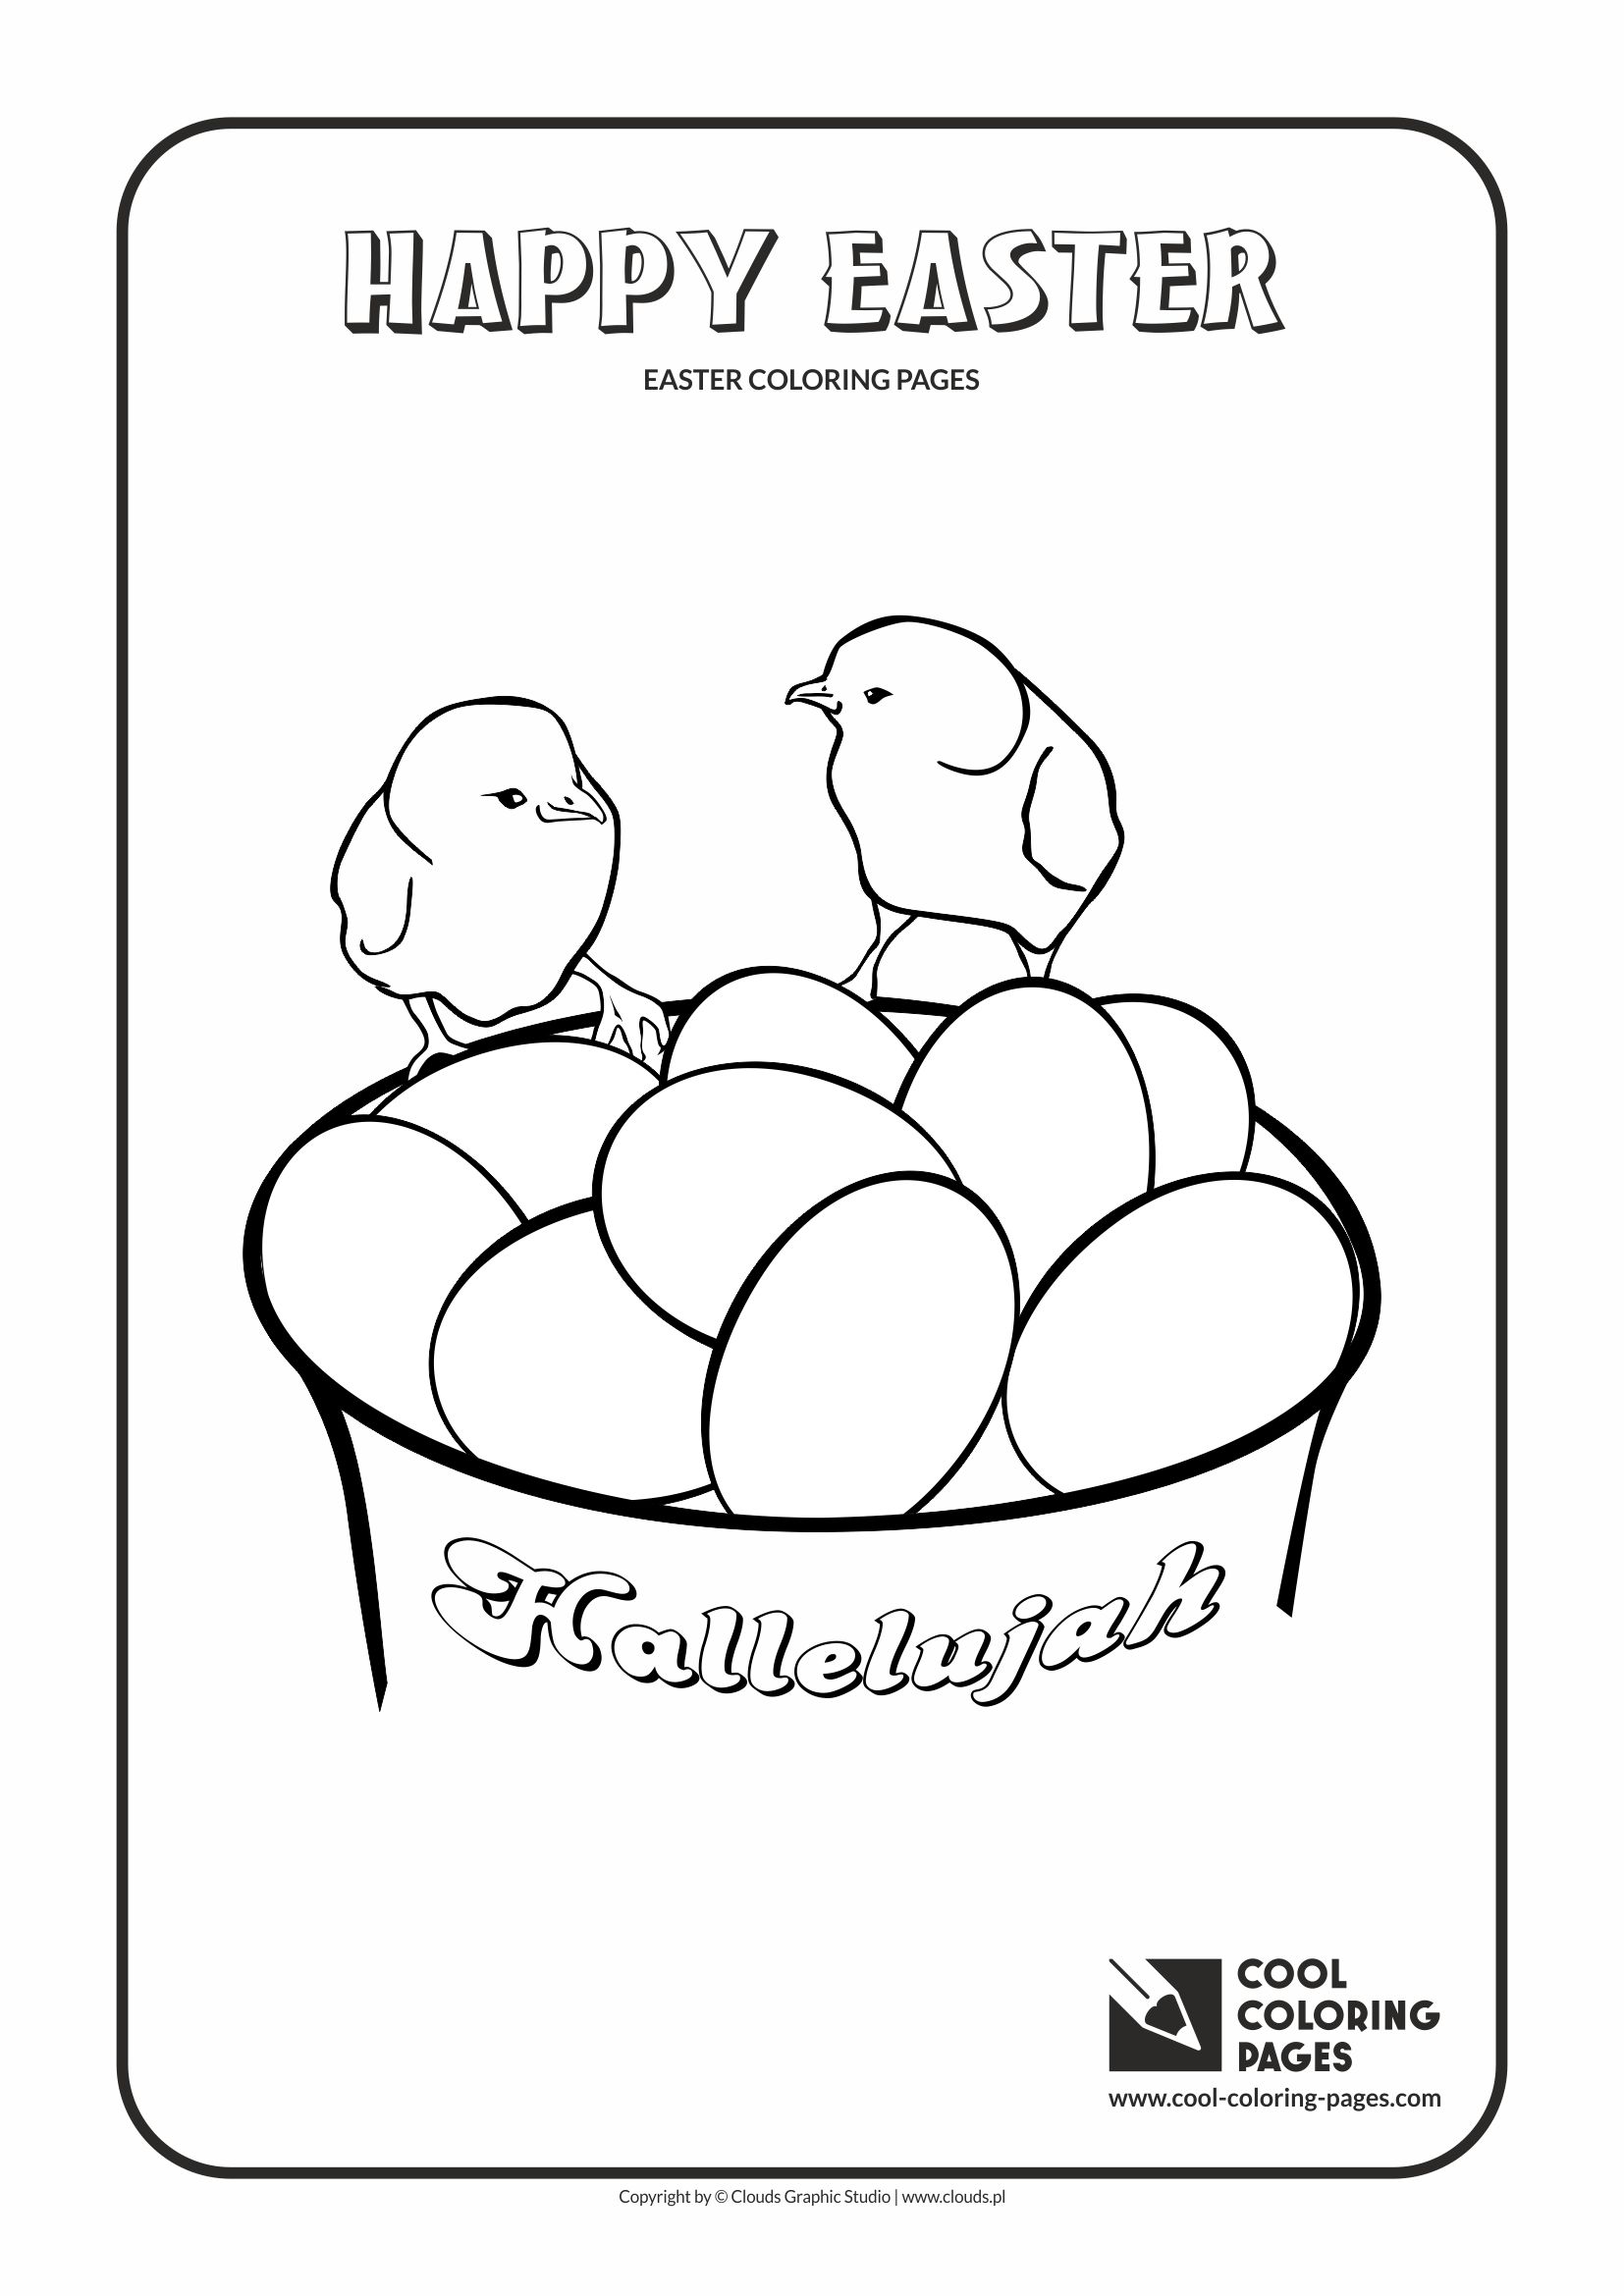 Cool Coloring Pages - Holidays / Easter eggs and chickens / Coloring page with Easter eggs and chickens